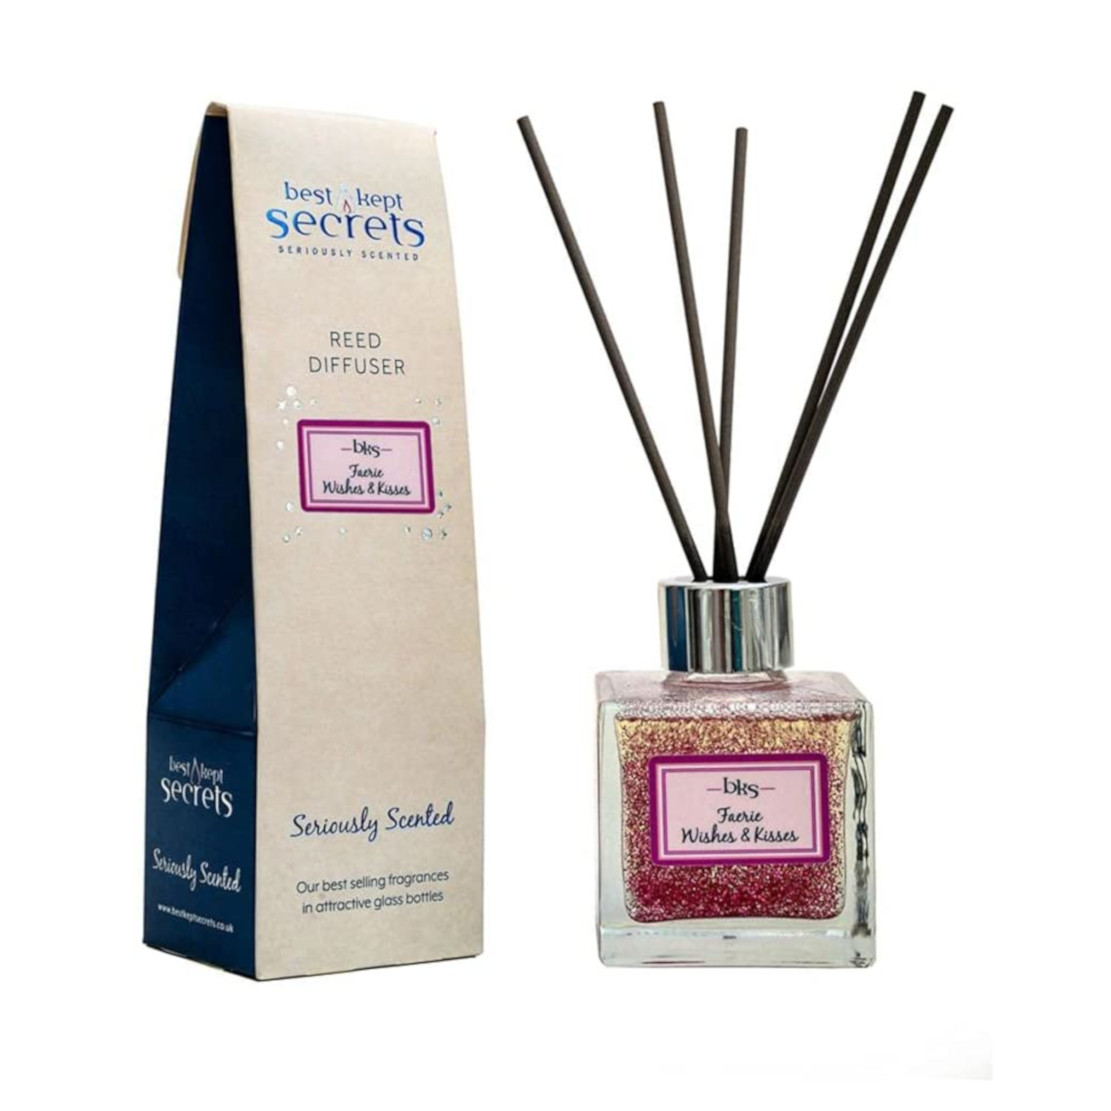 Best Kept Secrets Faerie Wishes and Kisses Sparkly Reed Diffuser 100ml